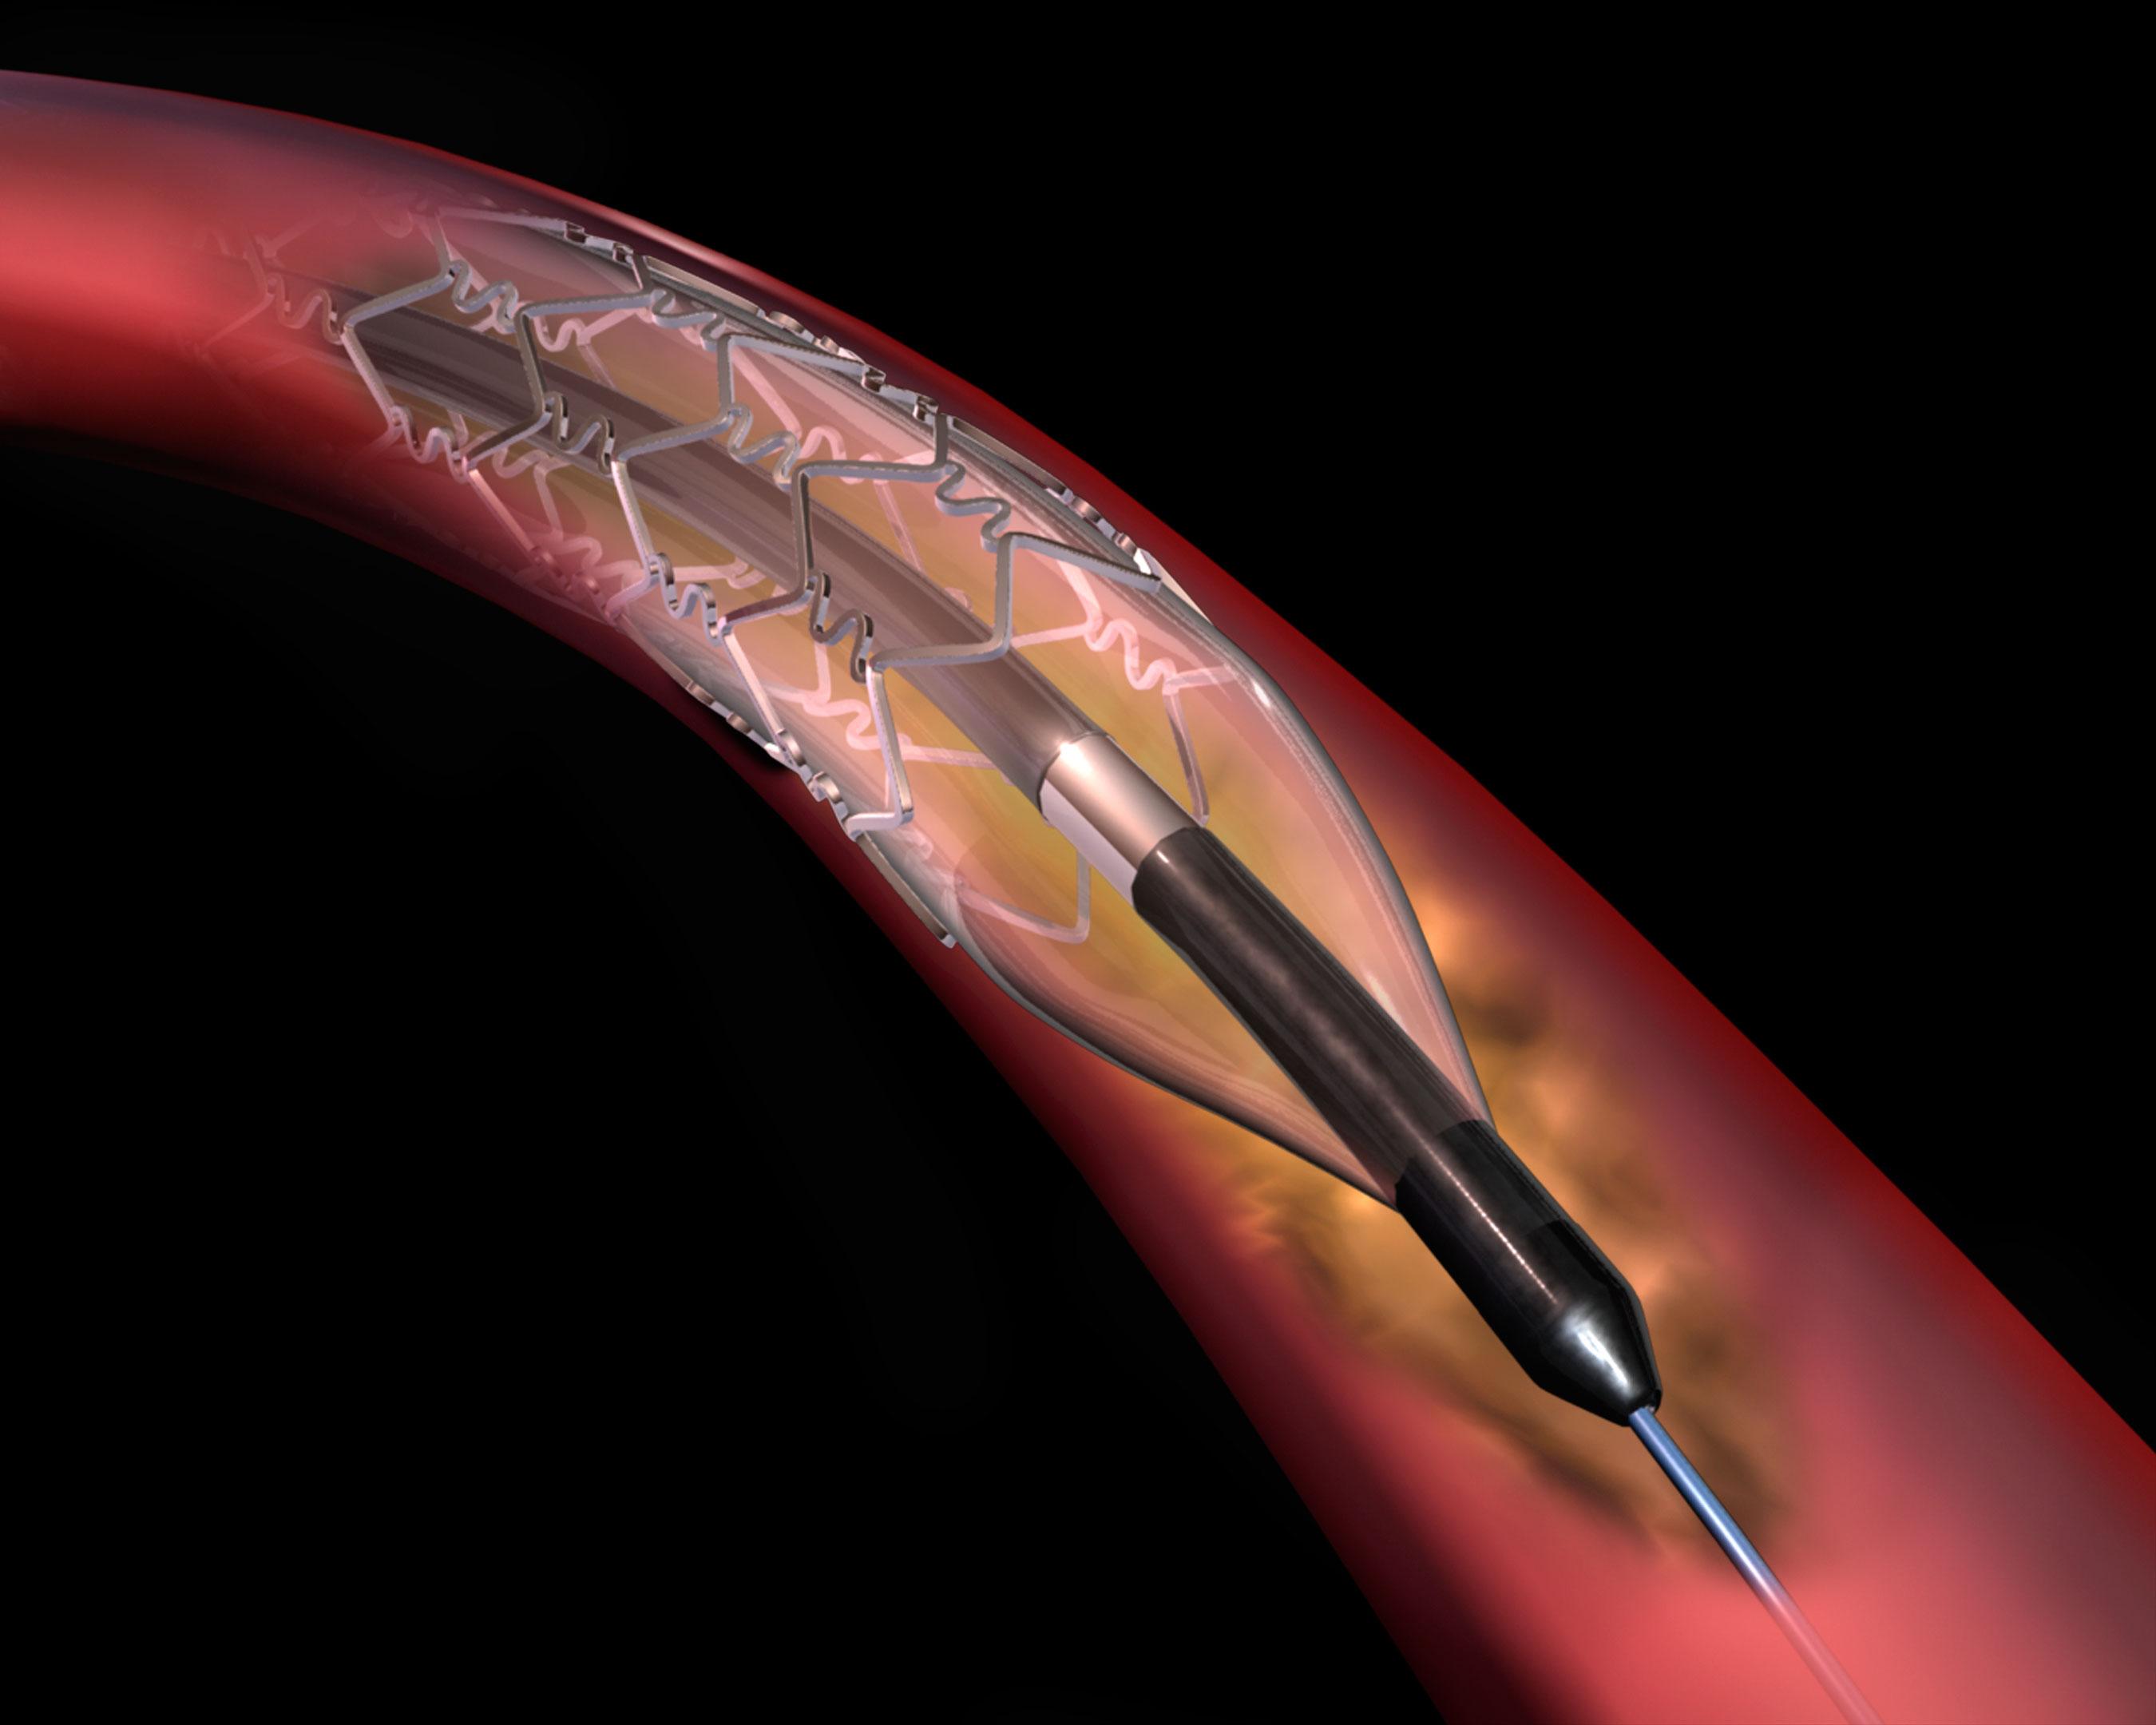 An illustration of a stent in the body.